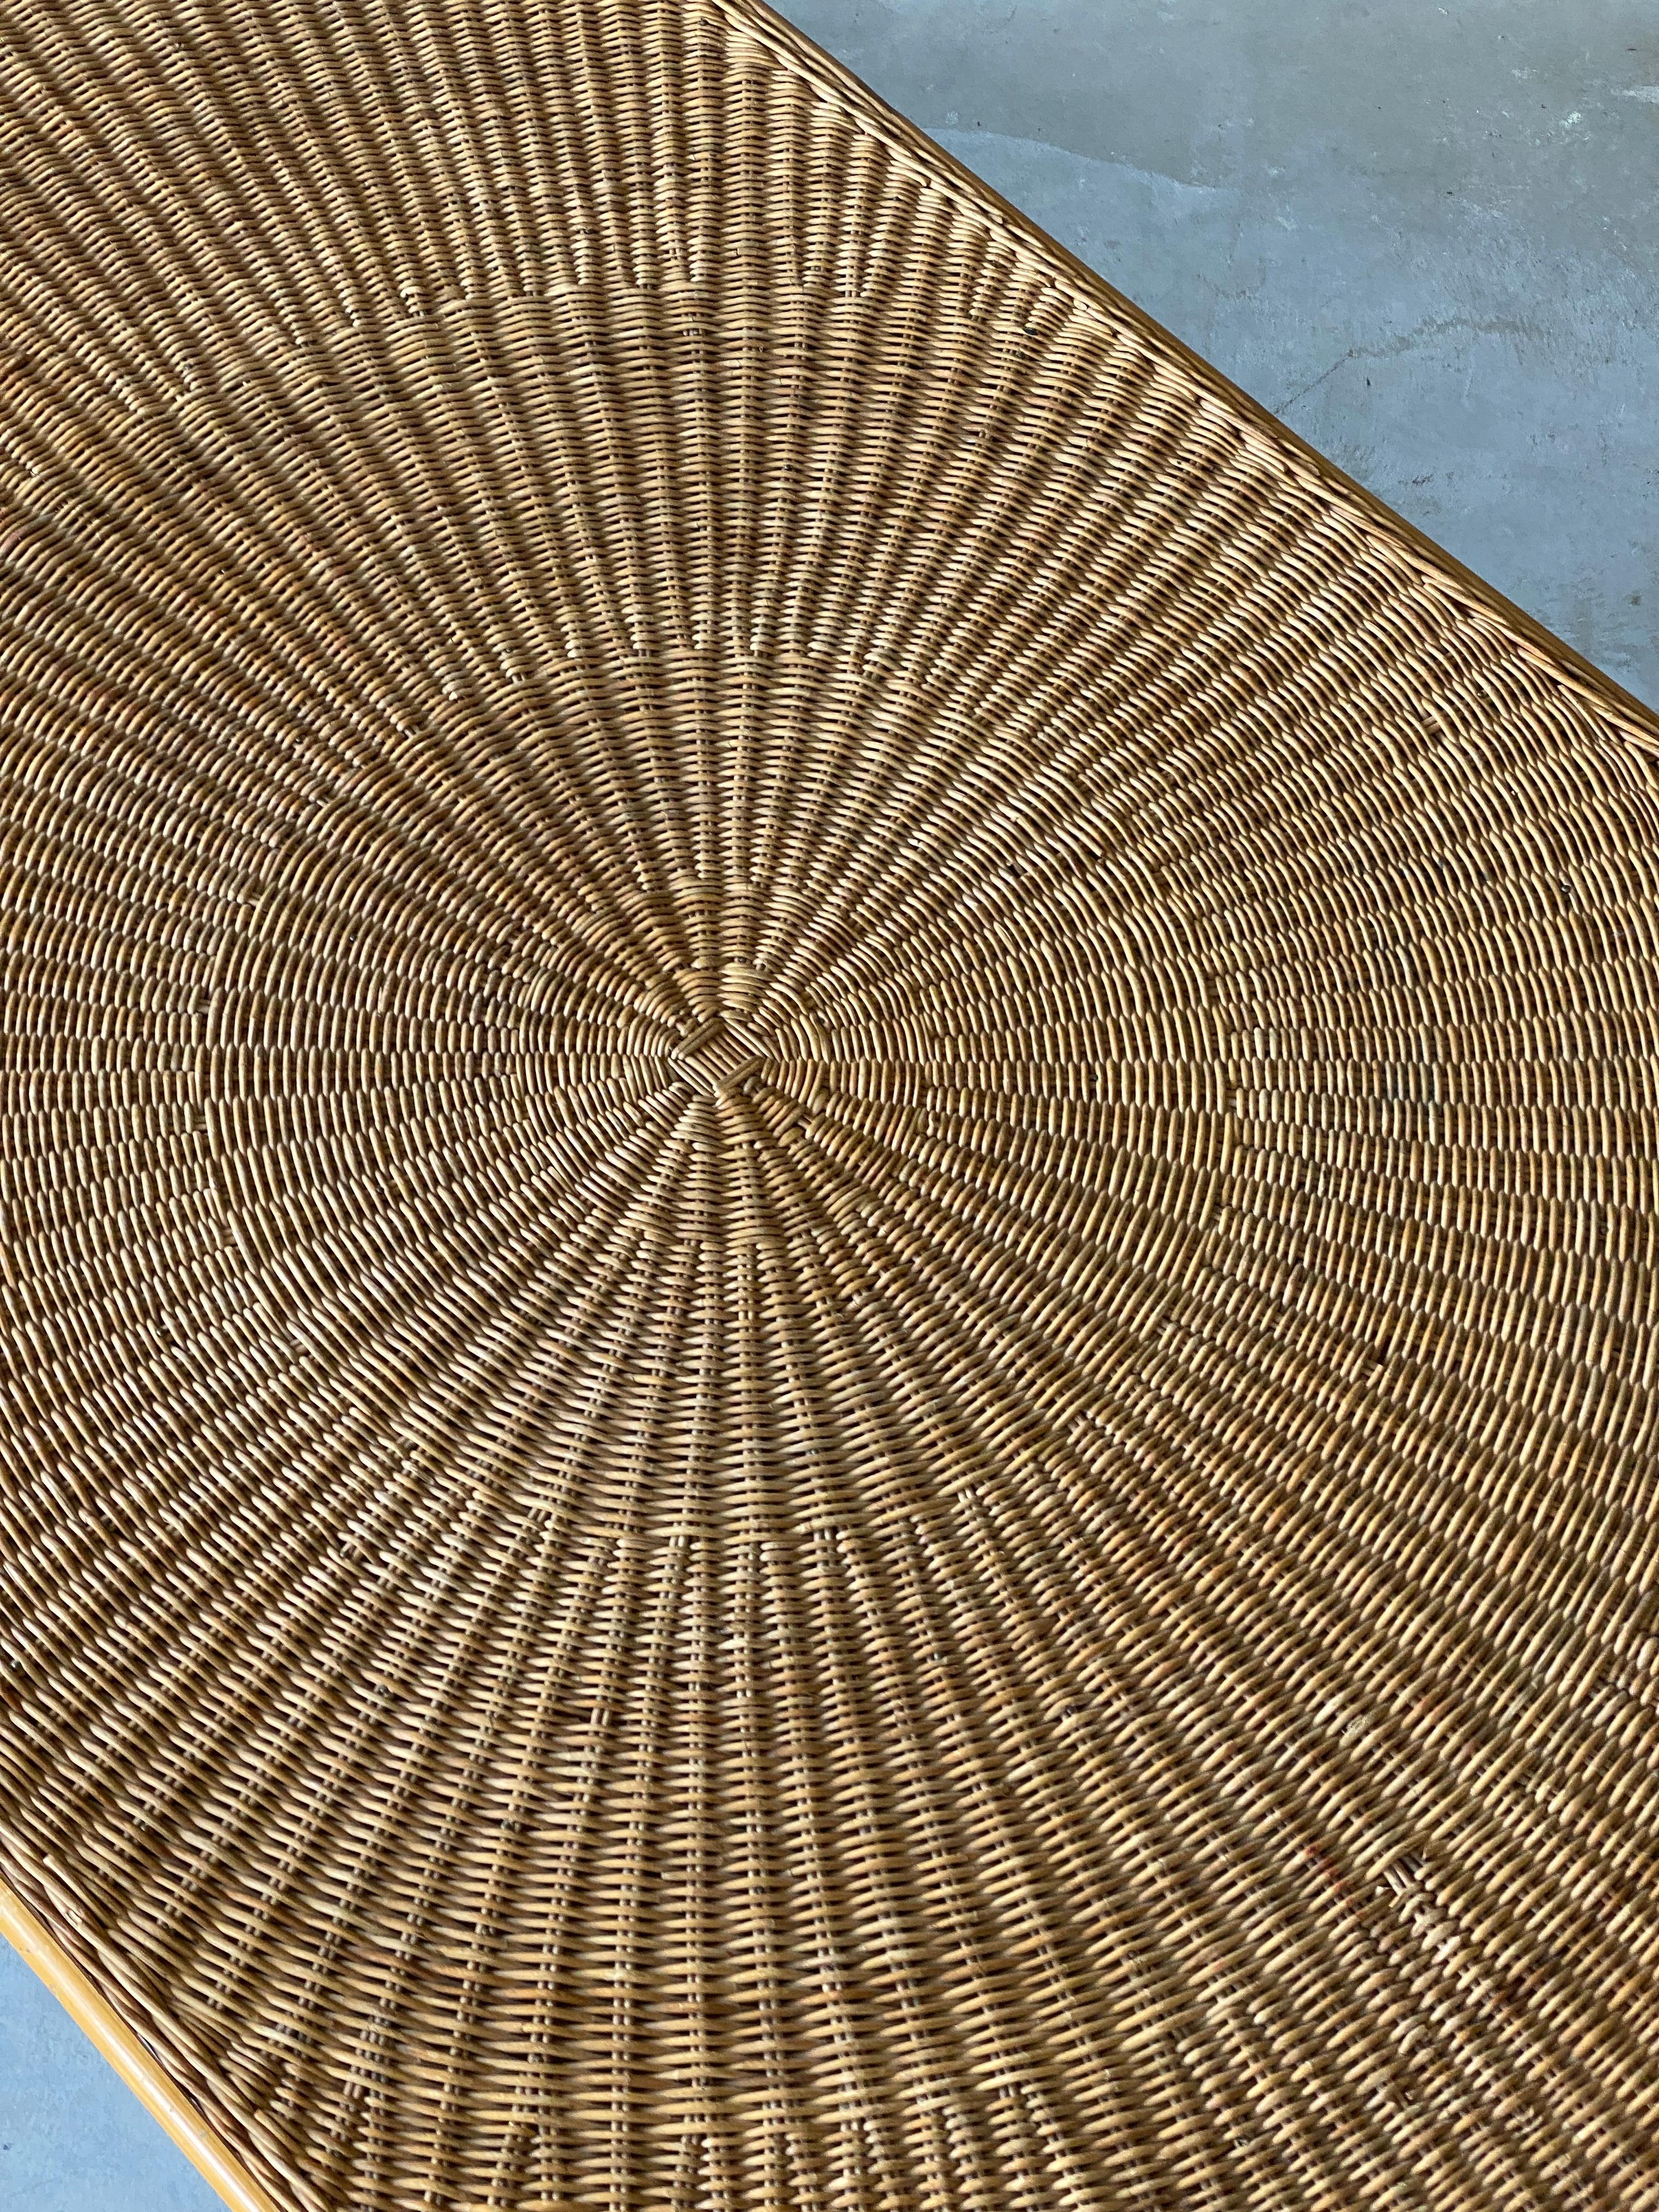 Mid-20th Century American Designer, Minimalist Dining Table, Woven Rattan, Lacquered Steel, 1950s